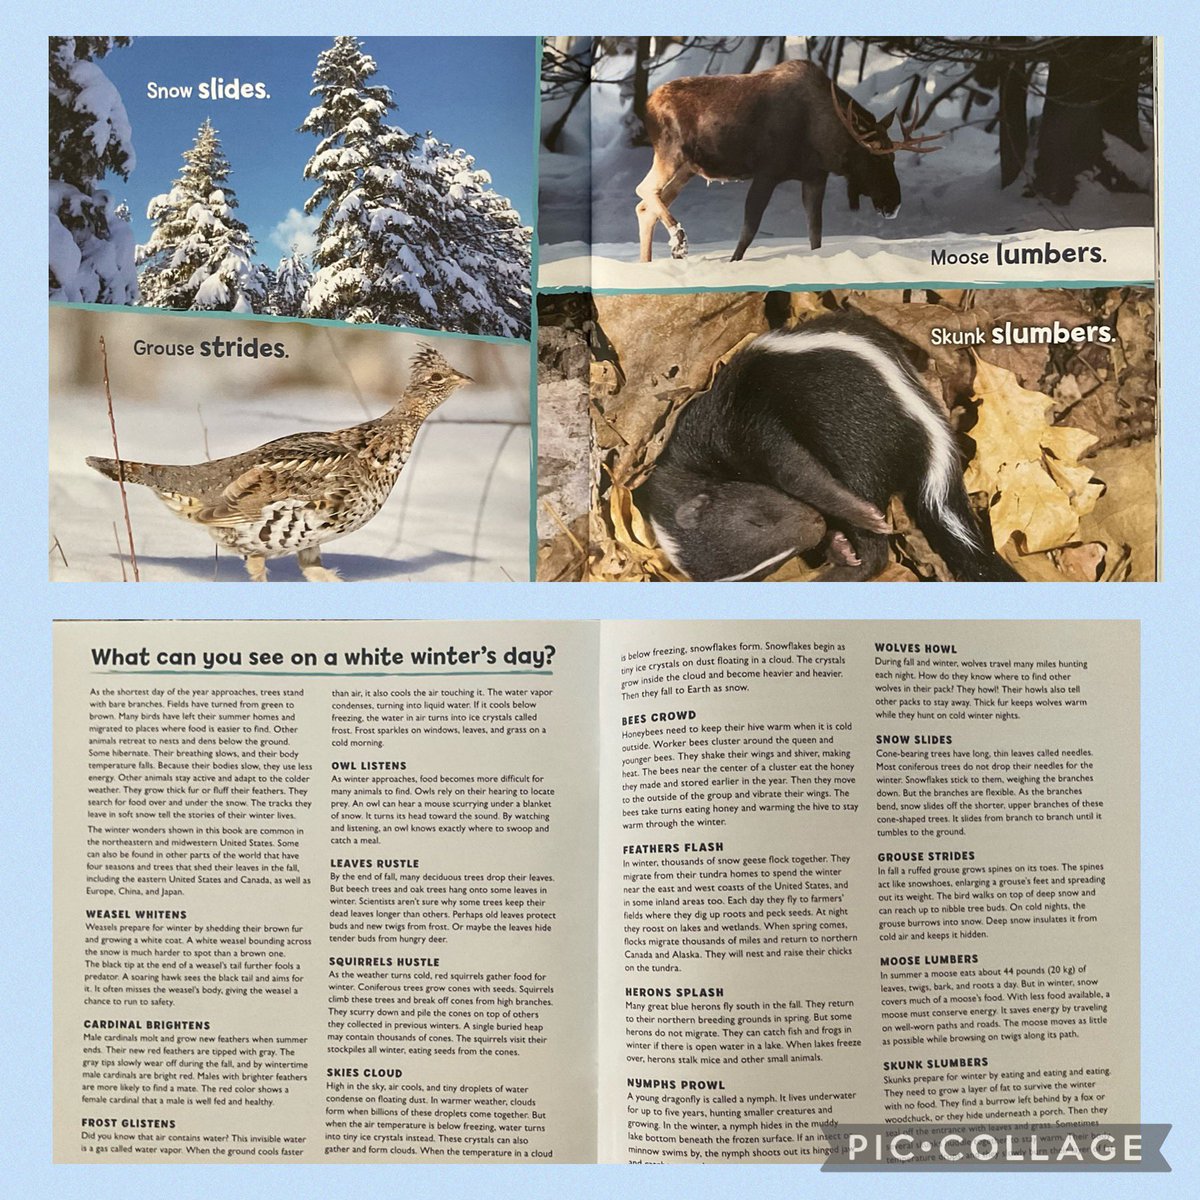 Outstanding @BuffySilverman upcoming release, ON A FLAKE-FLYING DAY pairs photographs and brief, rhyming text to give a complete picture of the play and adaptations of people & animals during winter. @LernerBooks #BookAllies